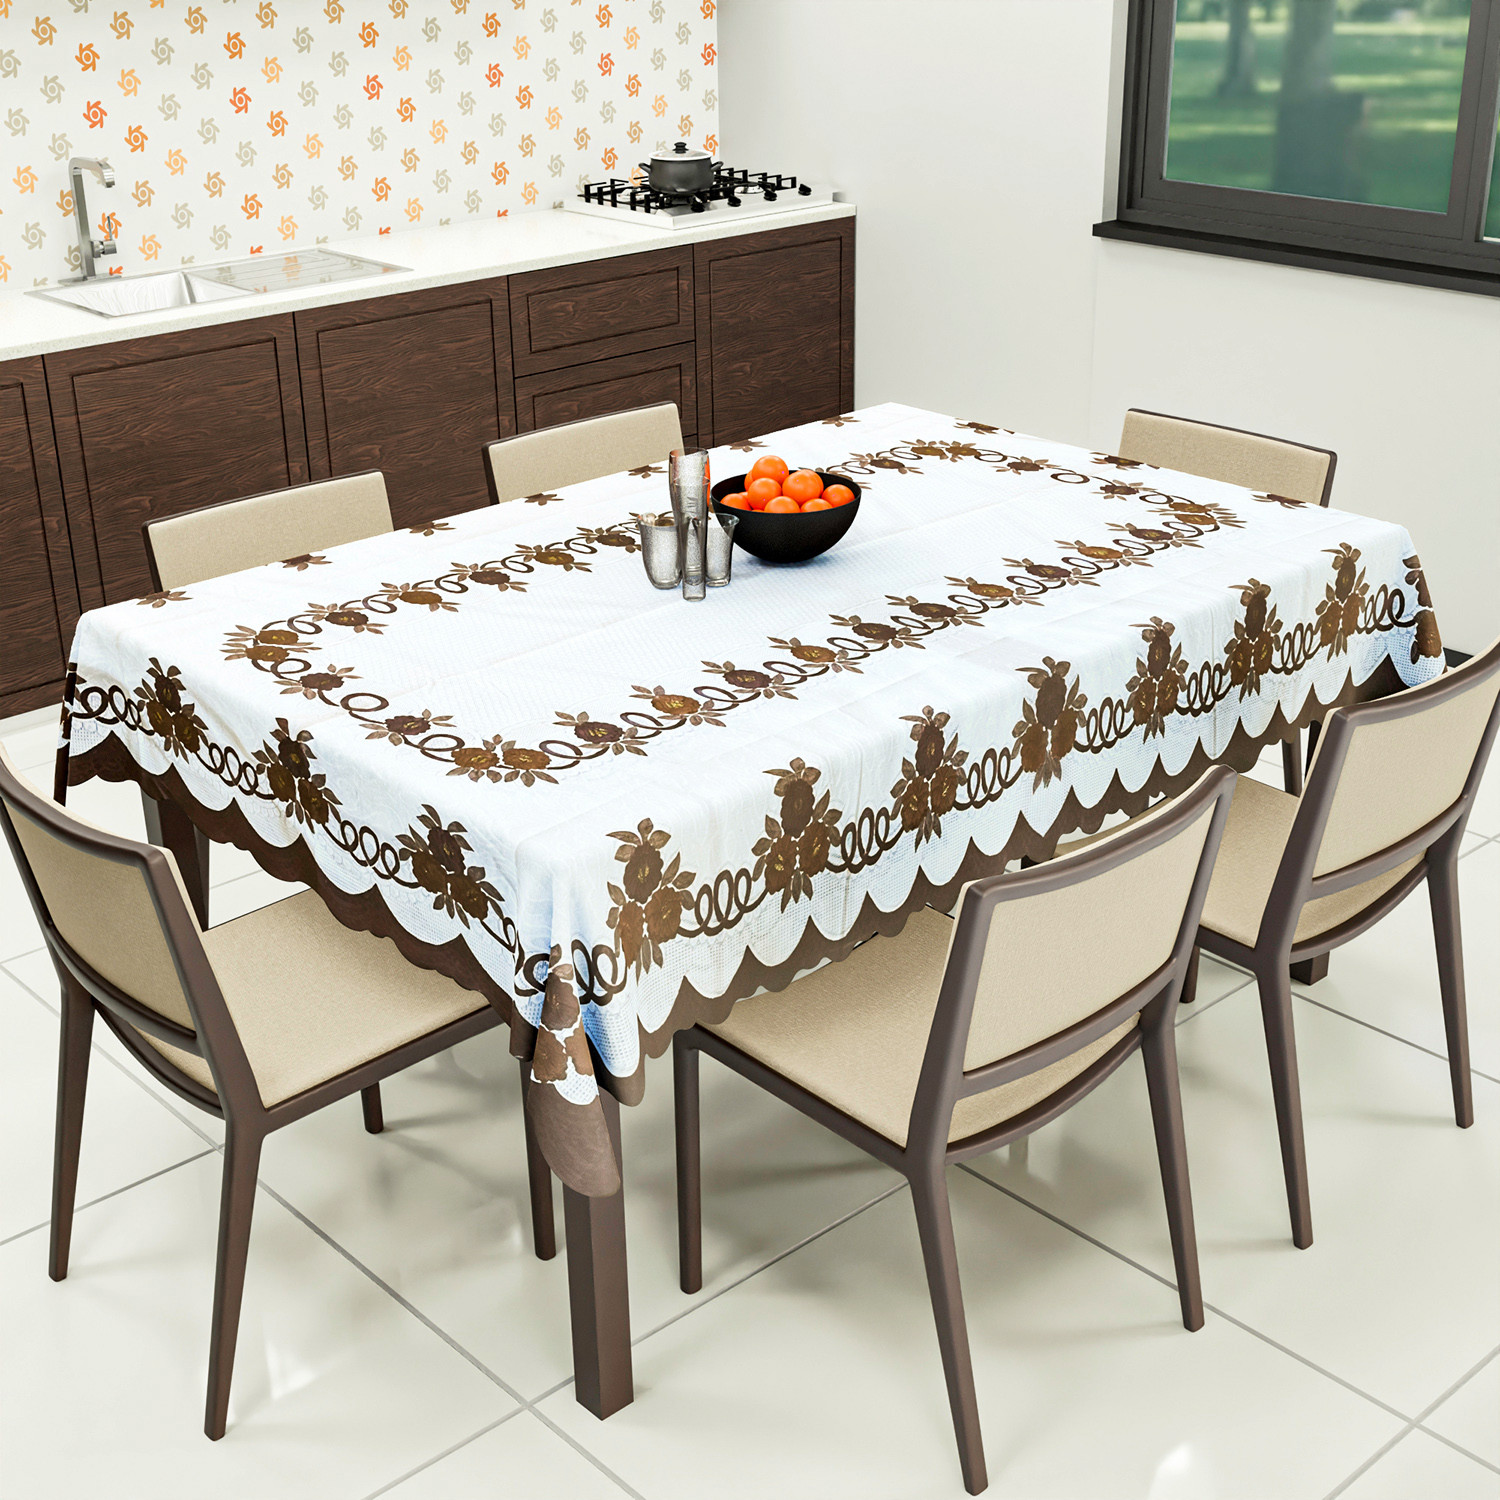 Kuber Industries Cotton Floral Print Waterproof Attractive Dining Table Cover|Tablecloth for Home Decorative, 60x90 Inch (Cream Brown)